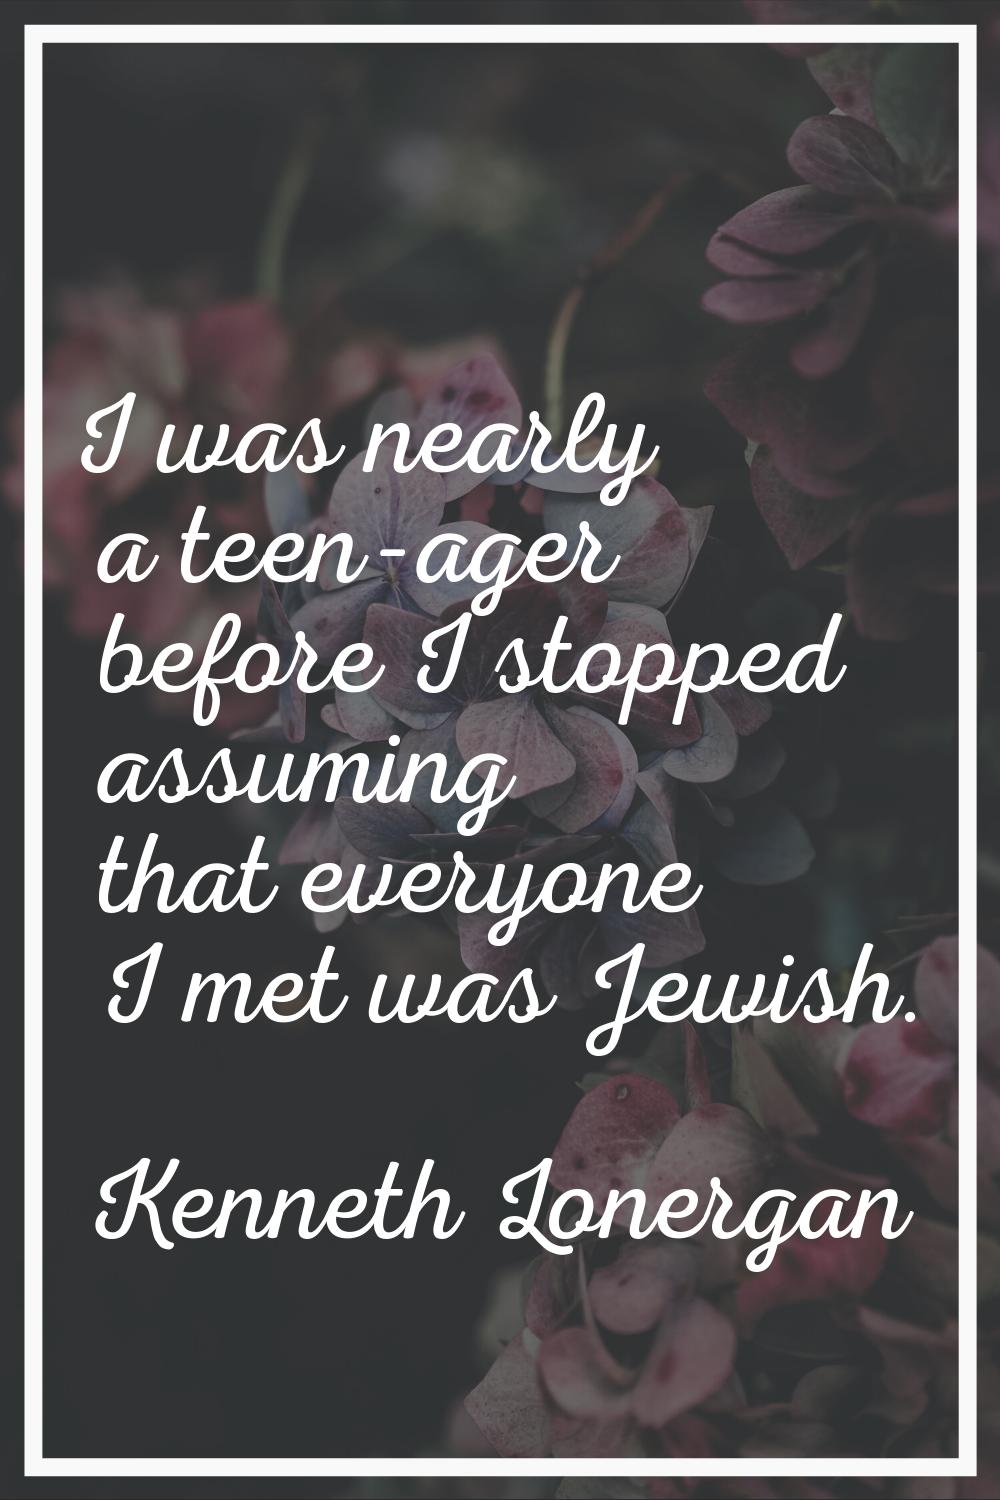 I was nearly a teen-ager before I stopped assuming that everyone I met was Jewish.